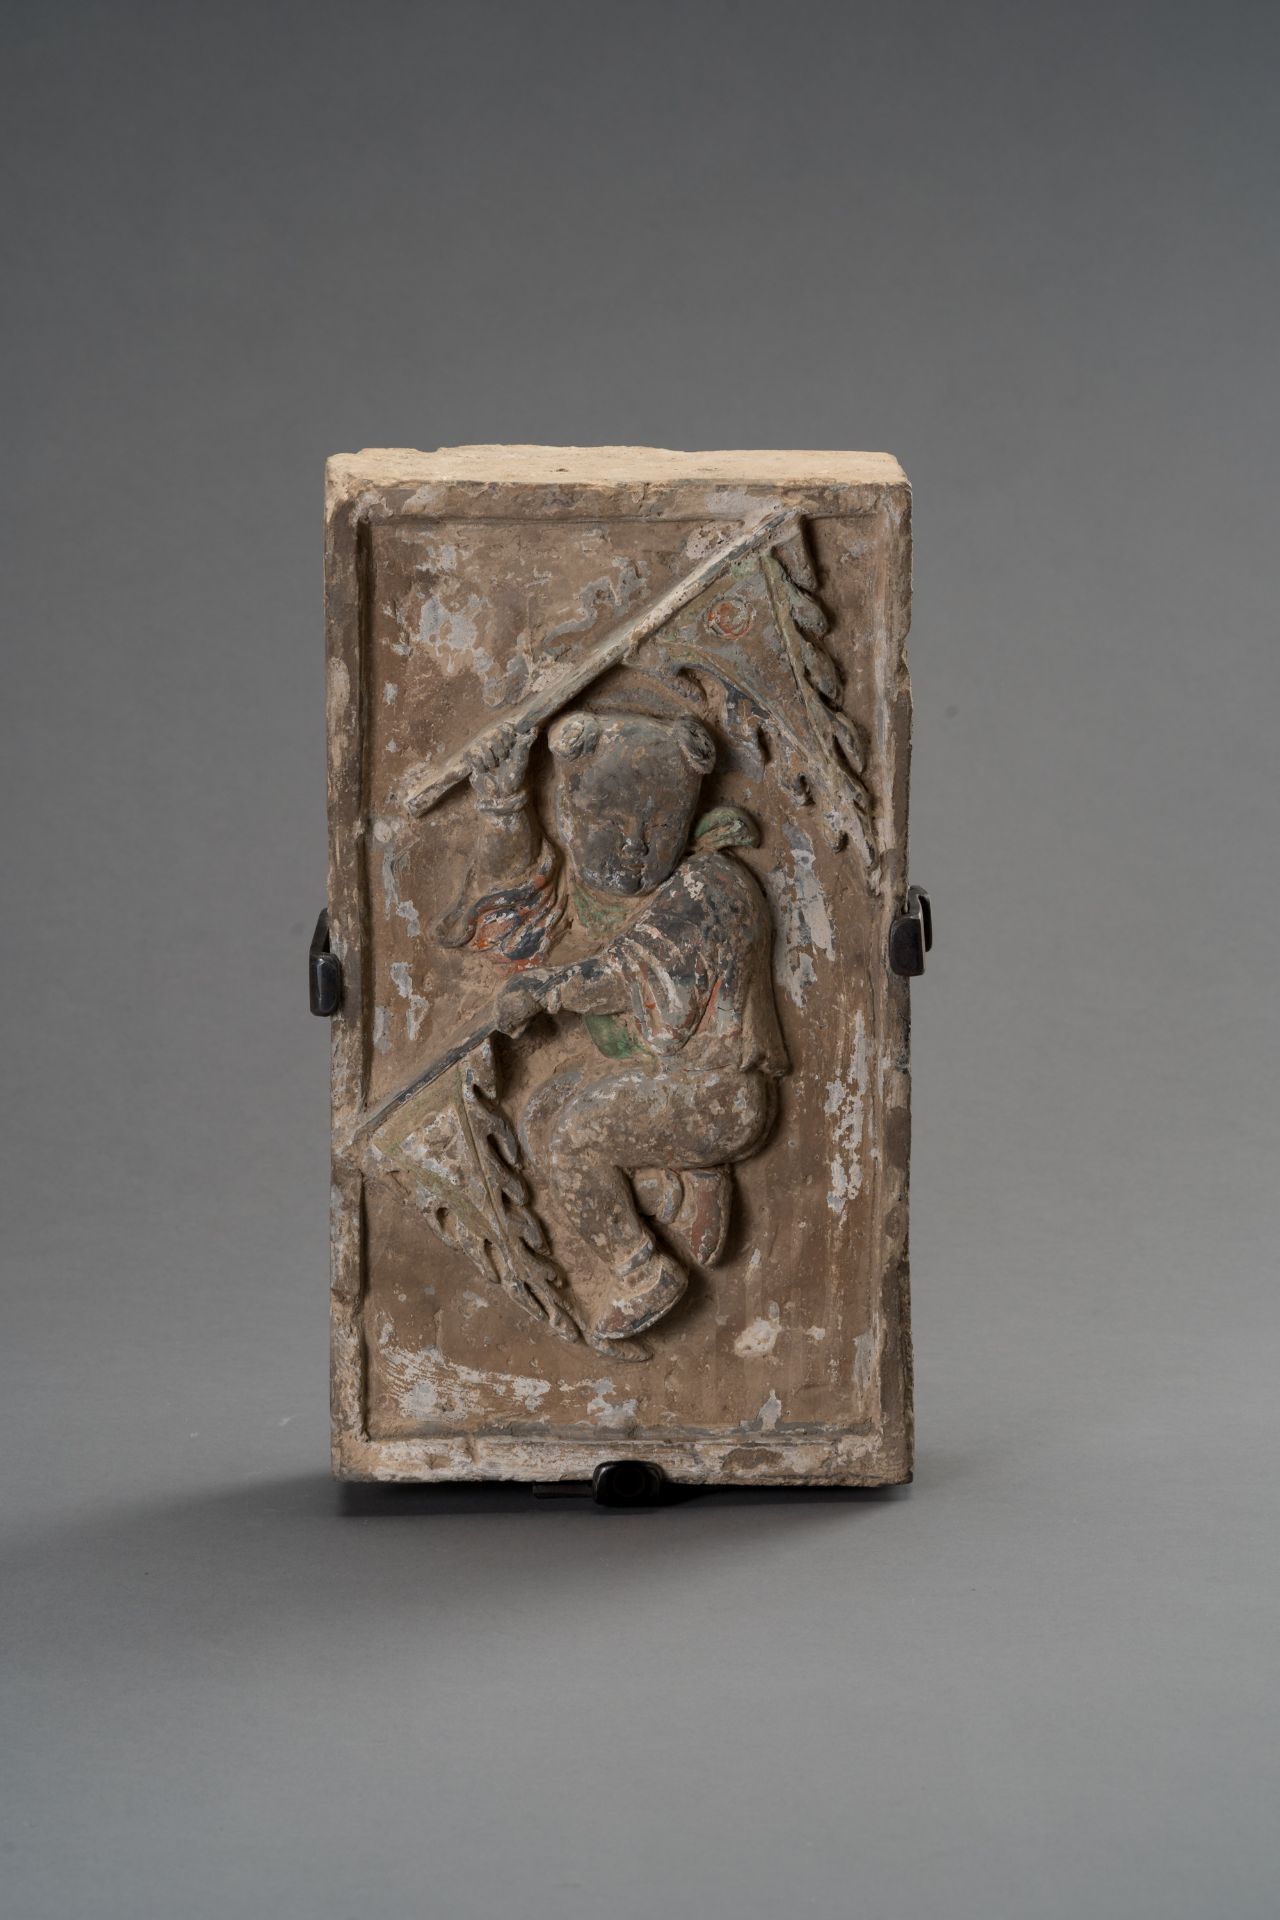 A TERRACOTTA WALL BRICK DEPICTING A CHILD WITH FLAGS, SONG DYNASTY